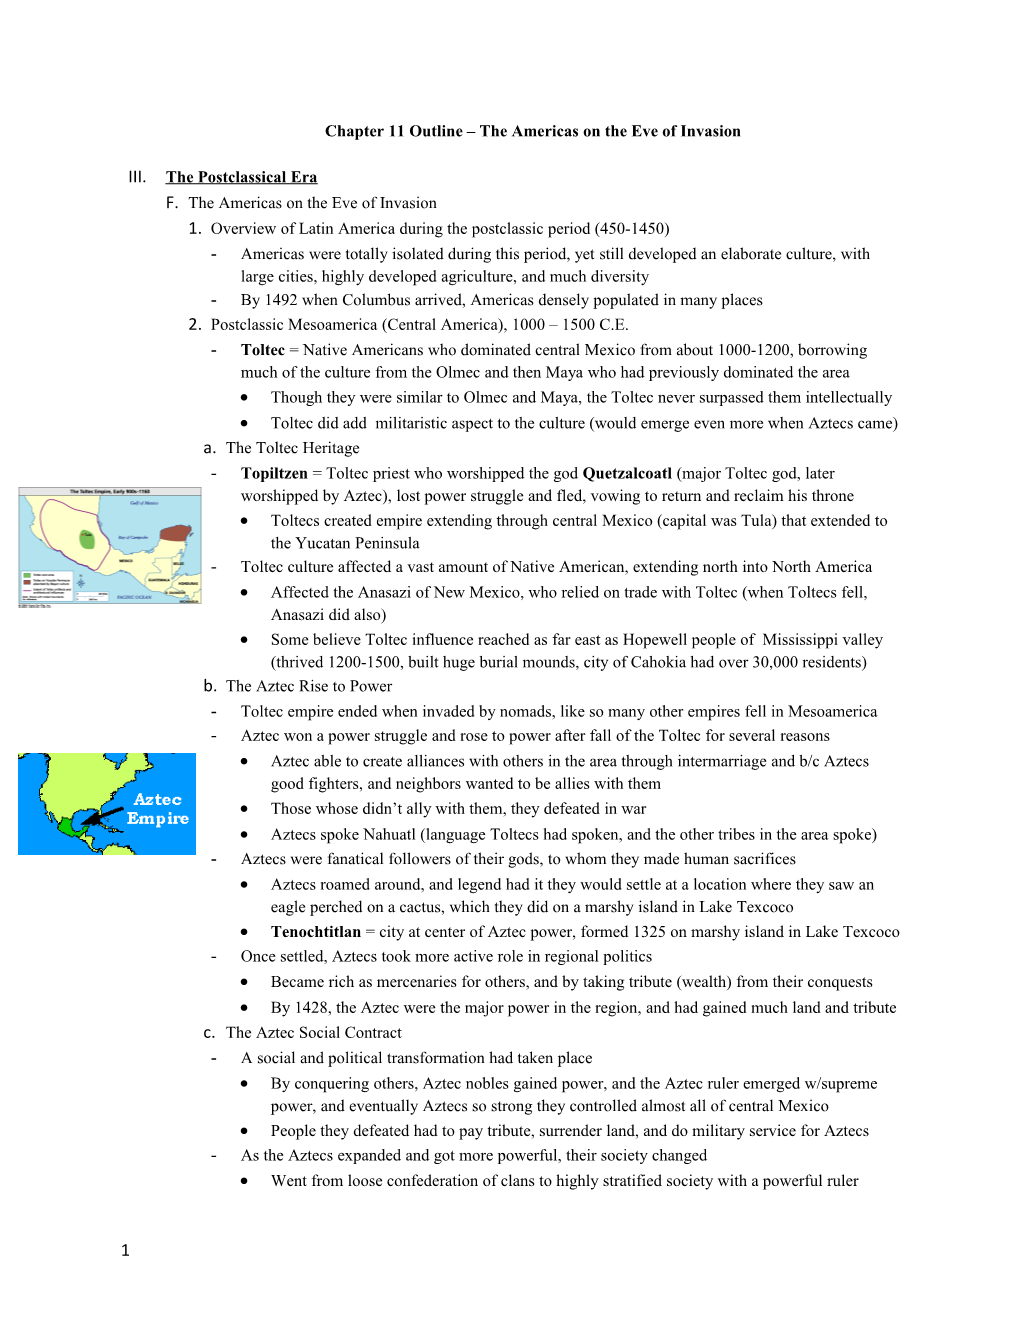 Chapter 11 Outline the Americas on the Eve of Invasion